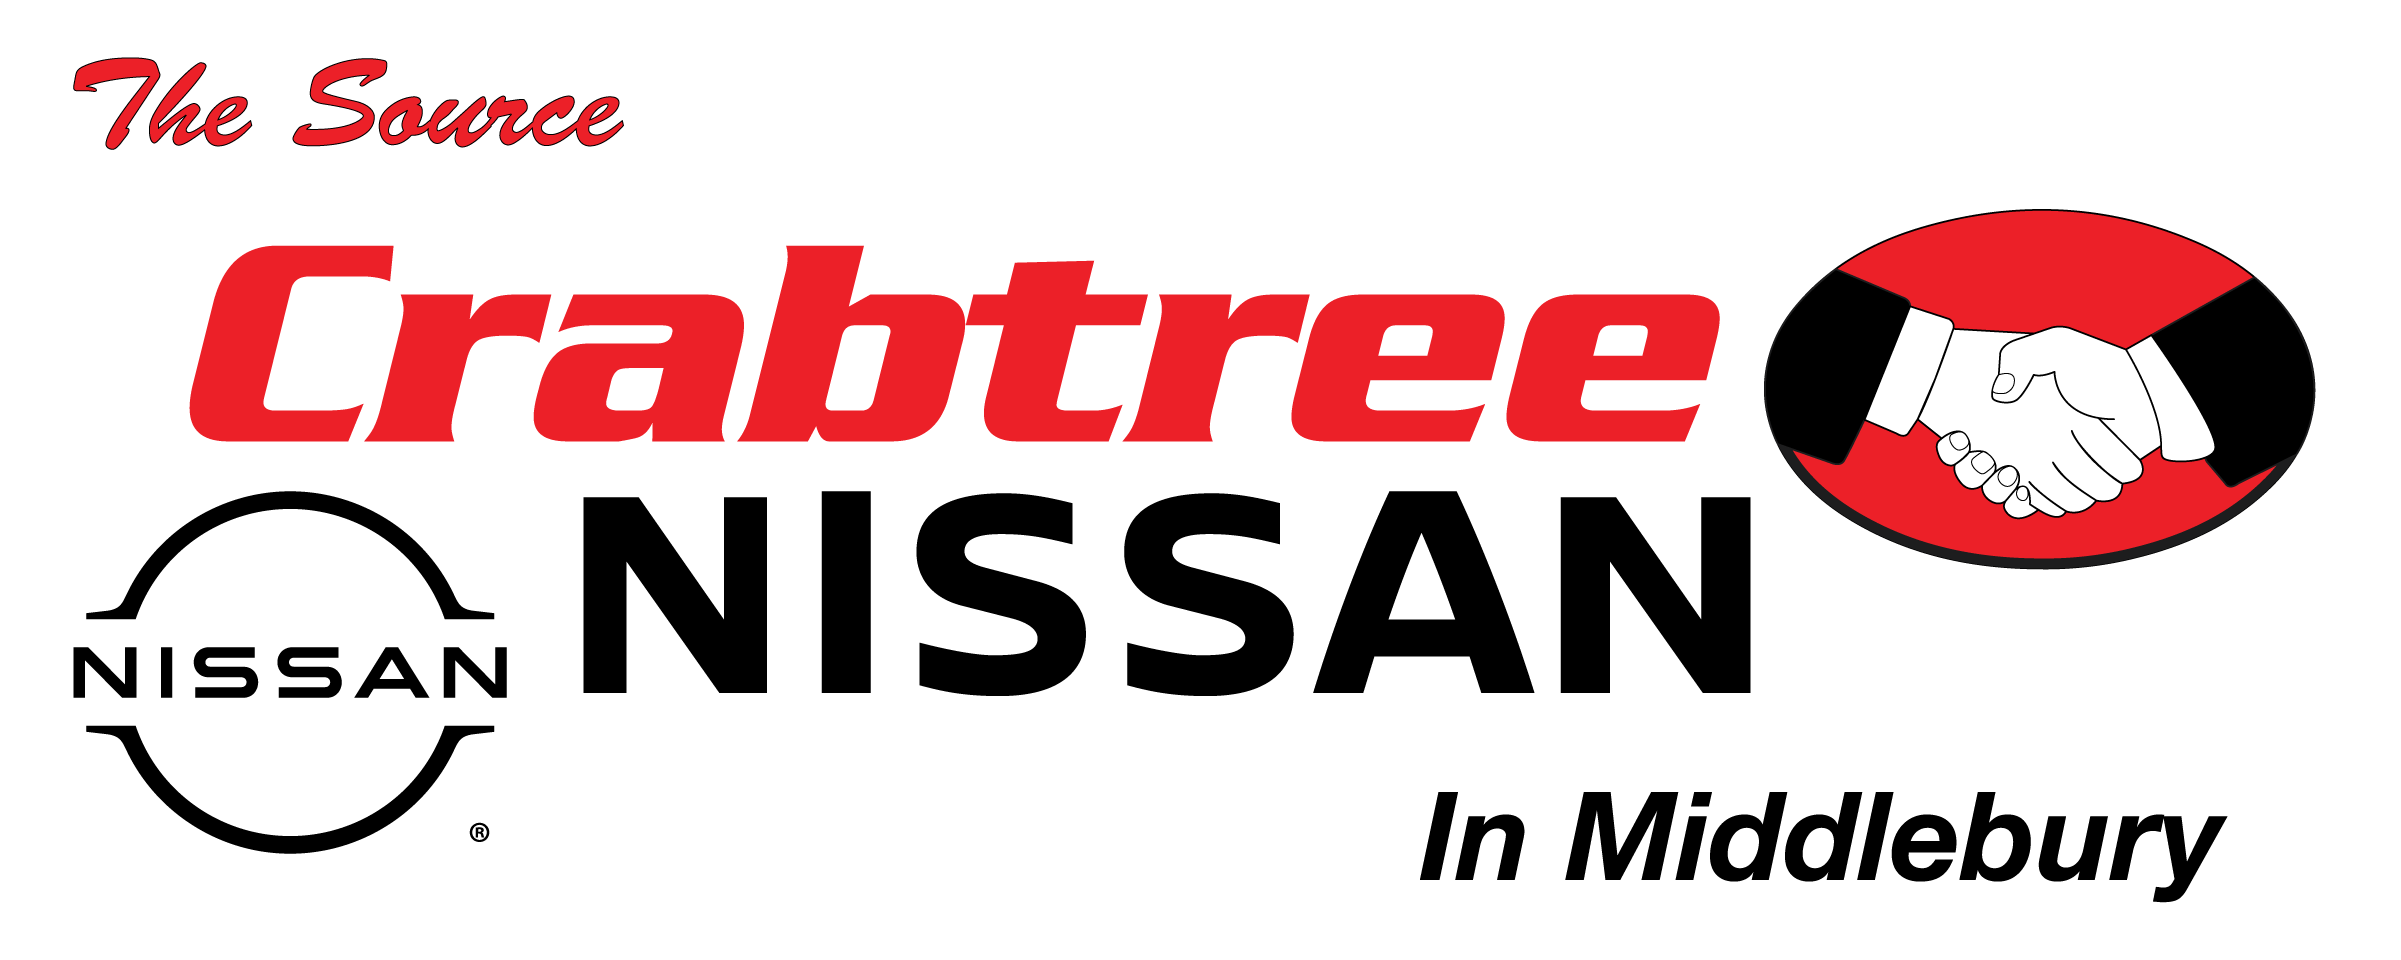 Colonial Nissan Online Express